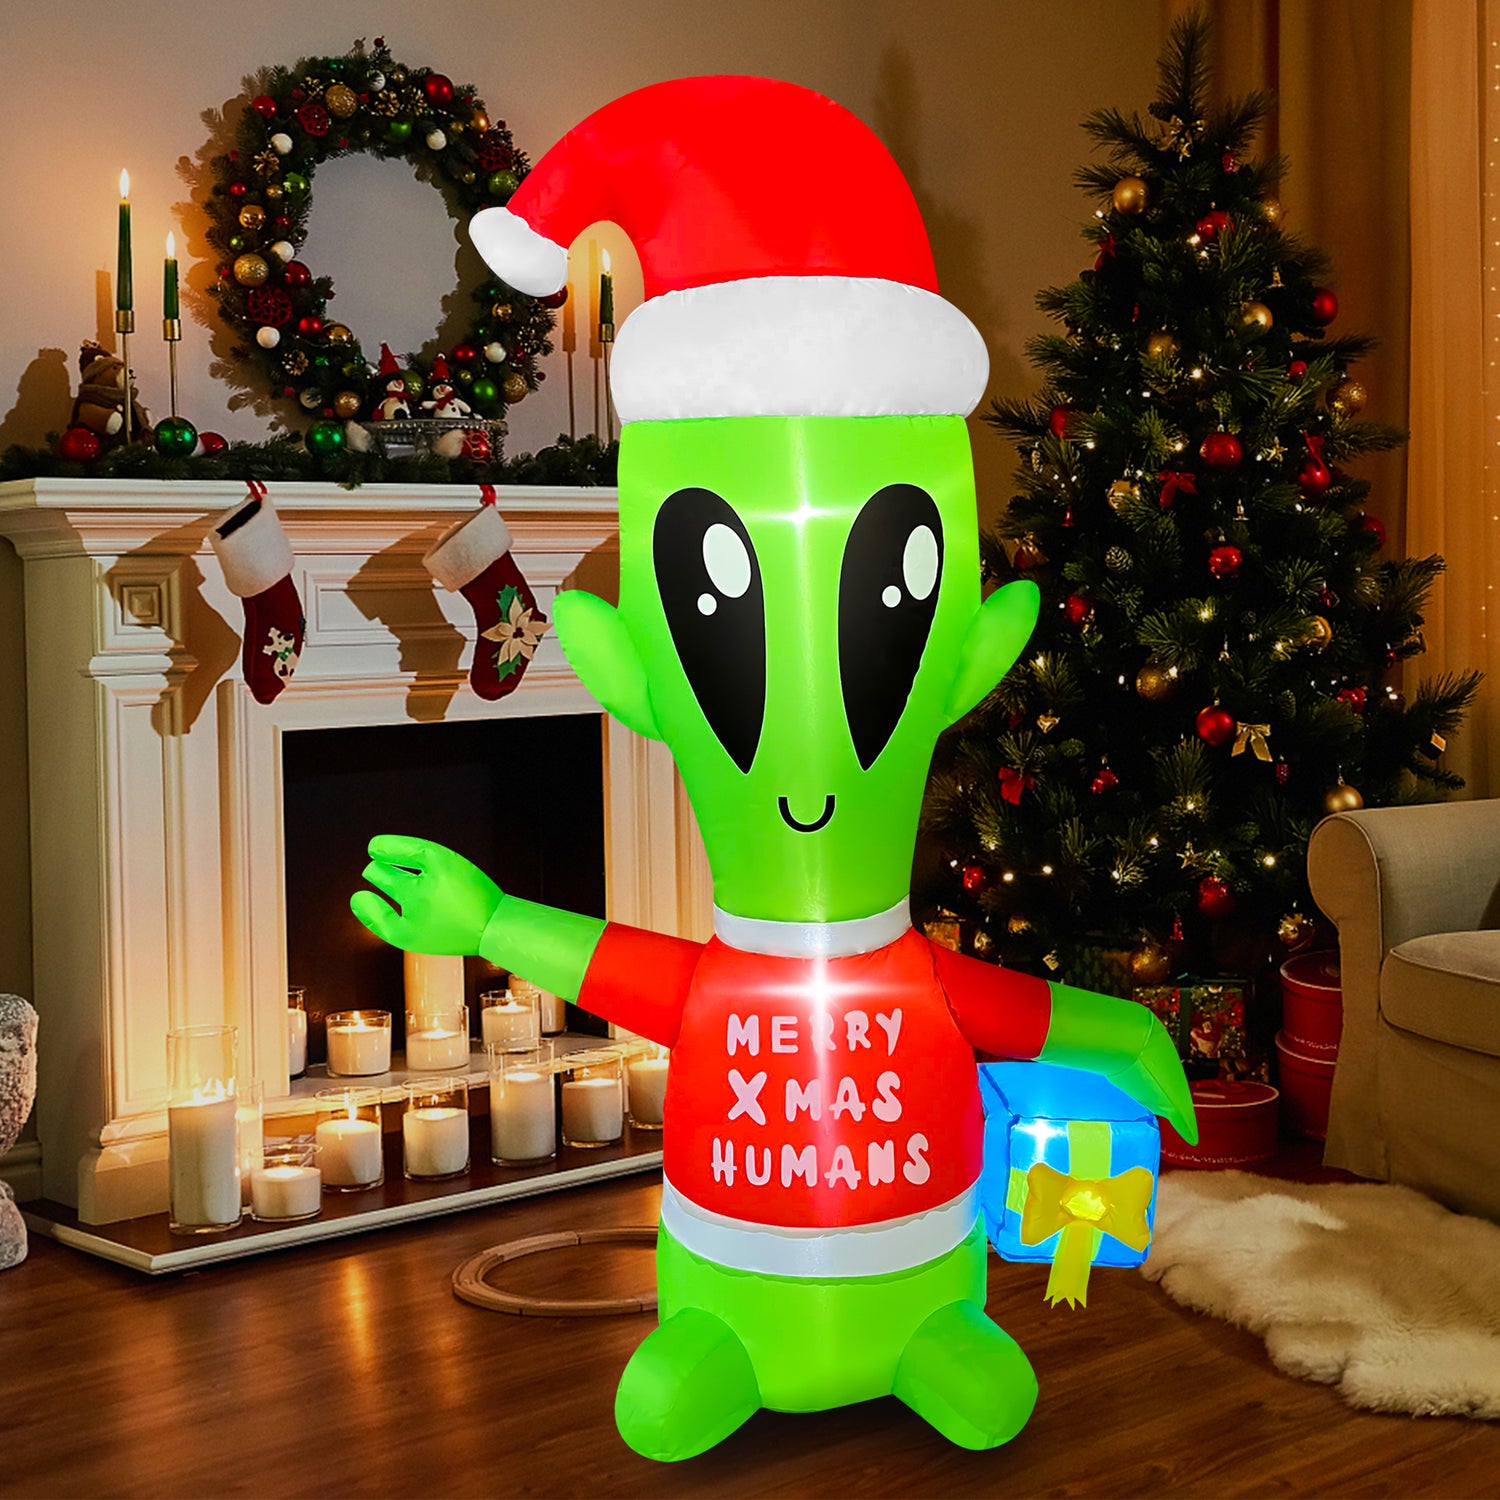 Christmas Inflatables Outdoor Decorations, Inflatables Ufo with Santa and Alien, 7ft Christmas Blow Up Yard Decorations with LED Lights for Xmas Party